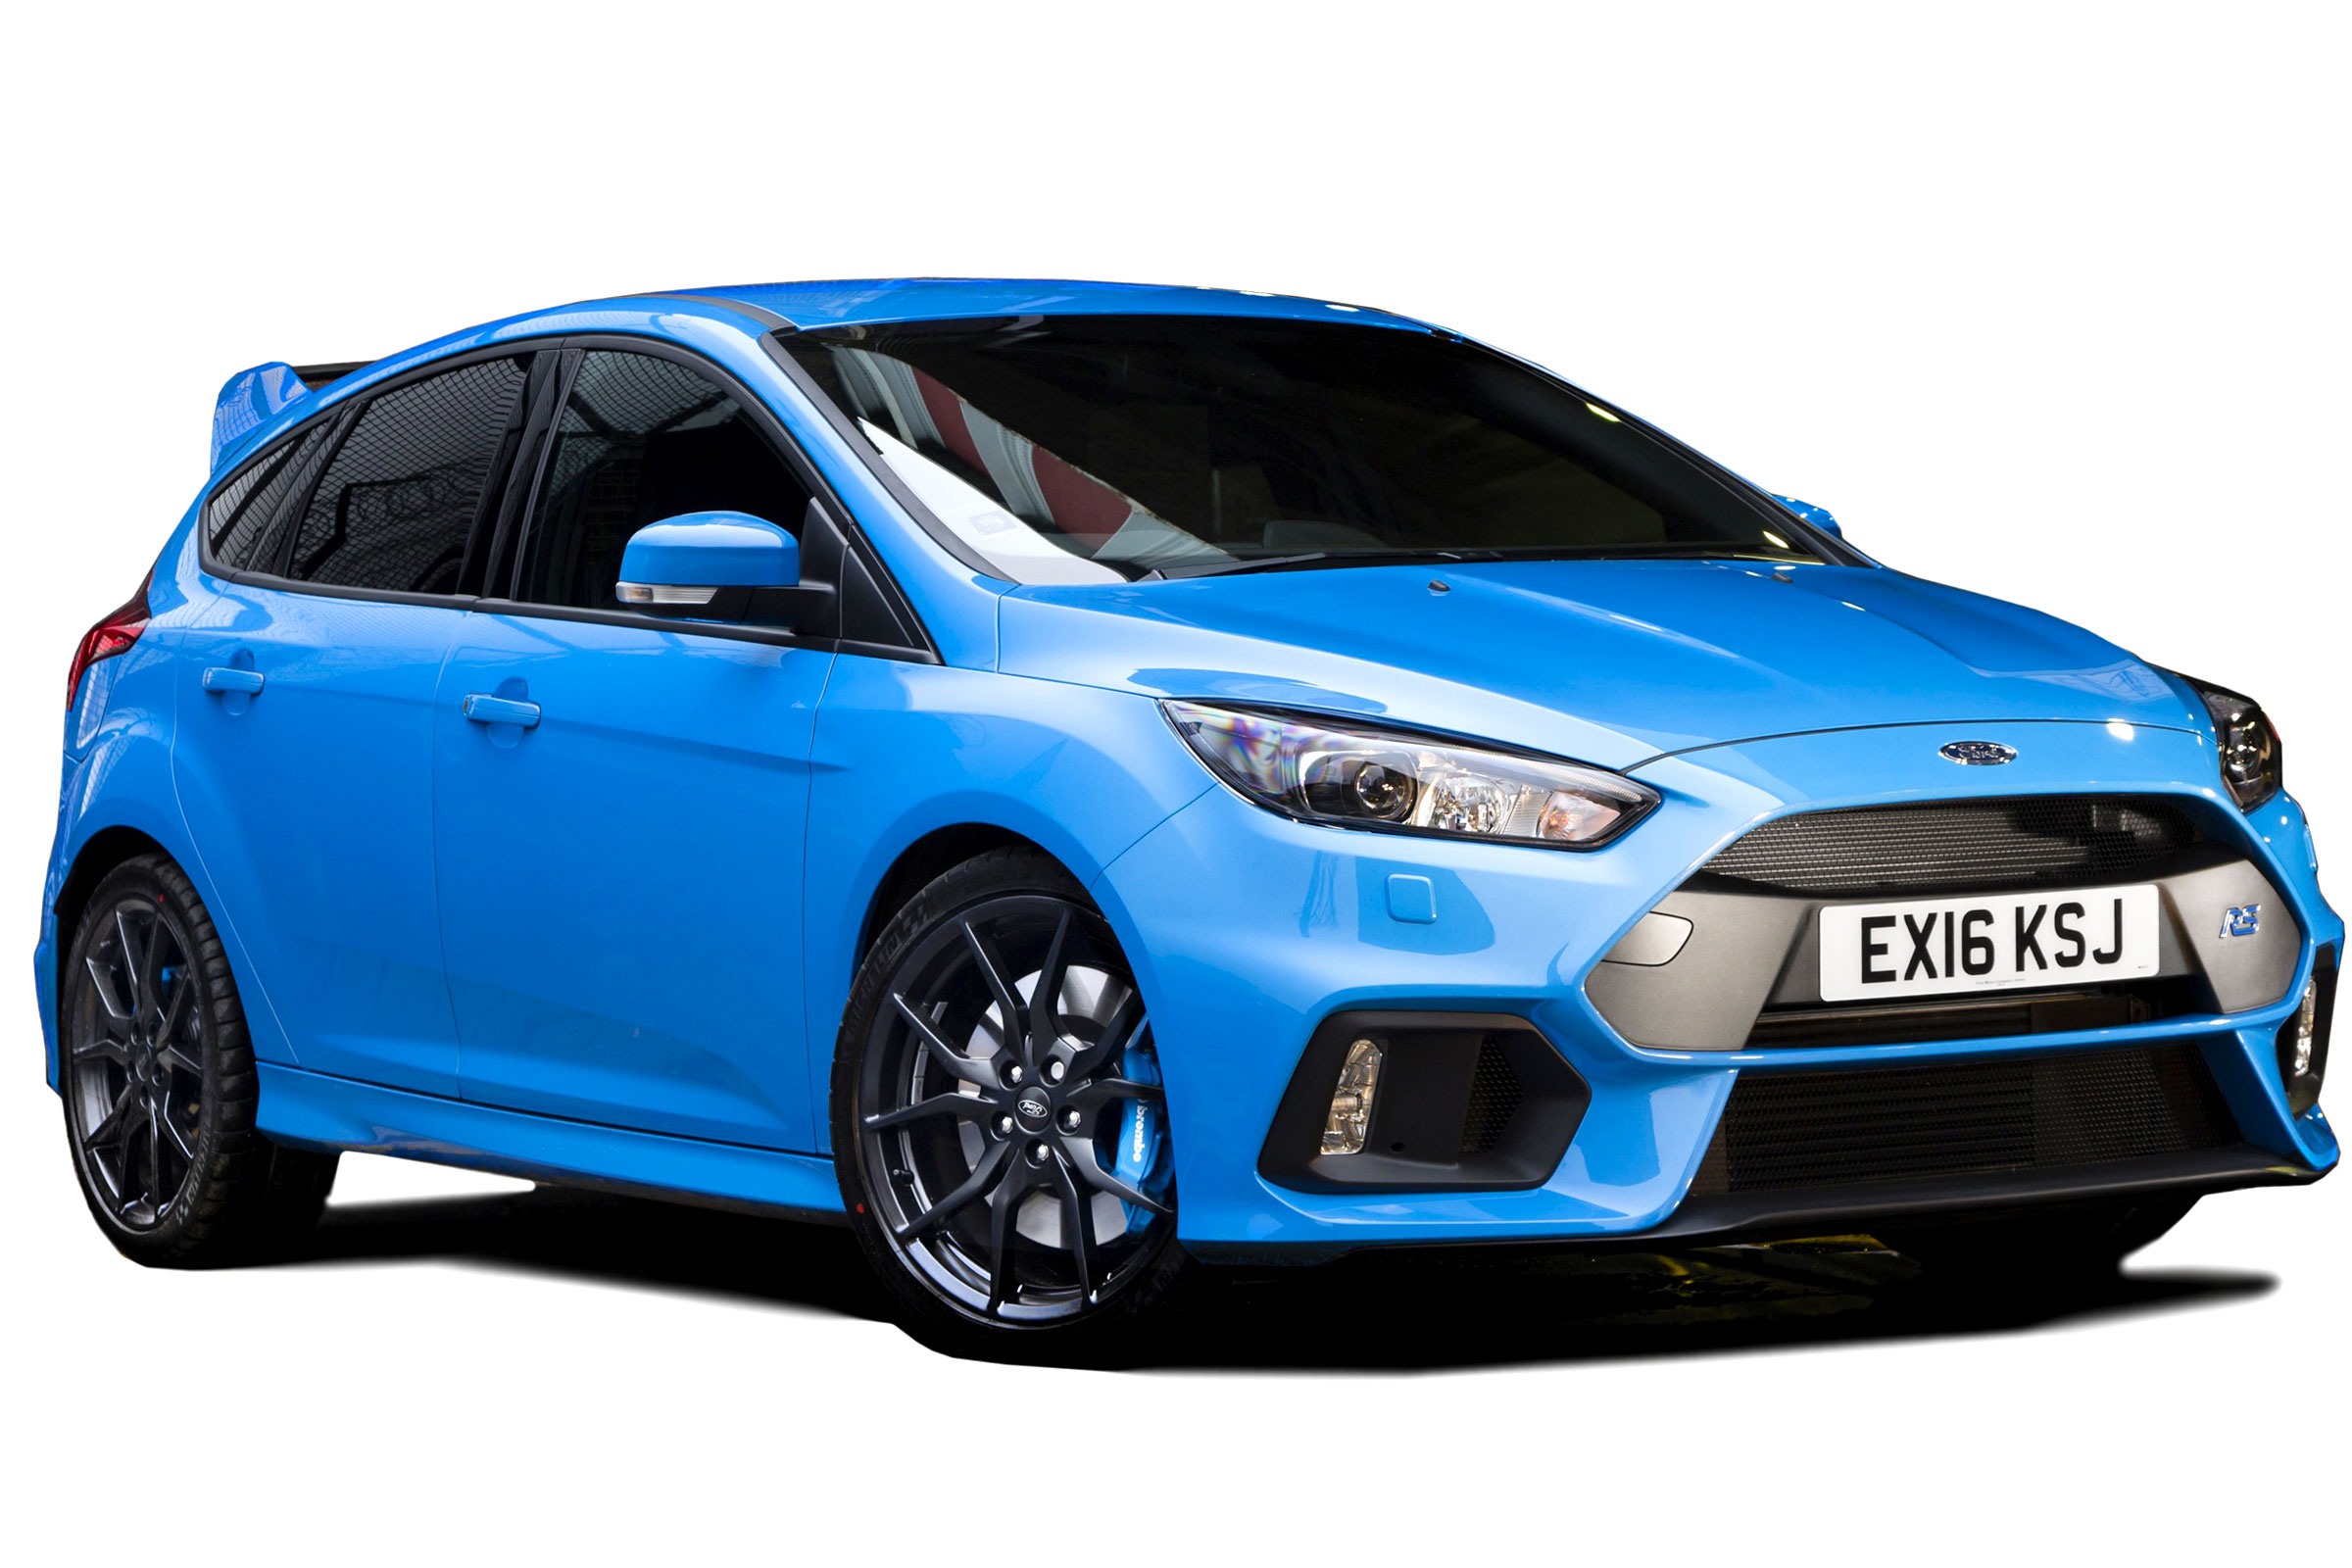 Ford Focus Rs Hatchback 16 18 Engines Drive Performance Carbuyer